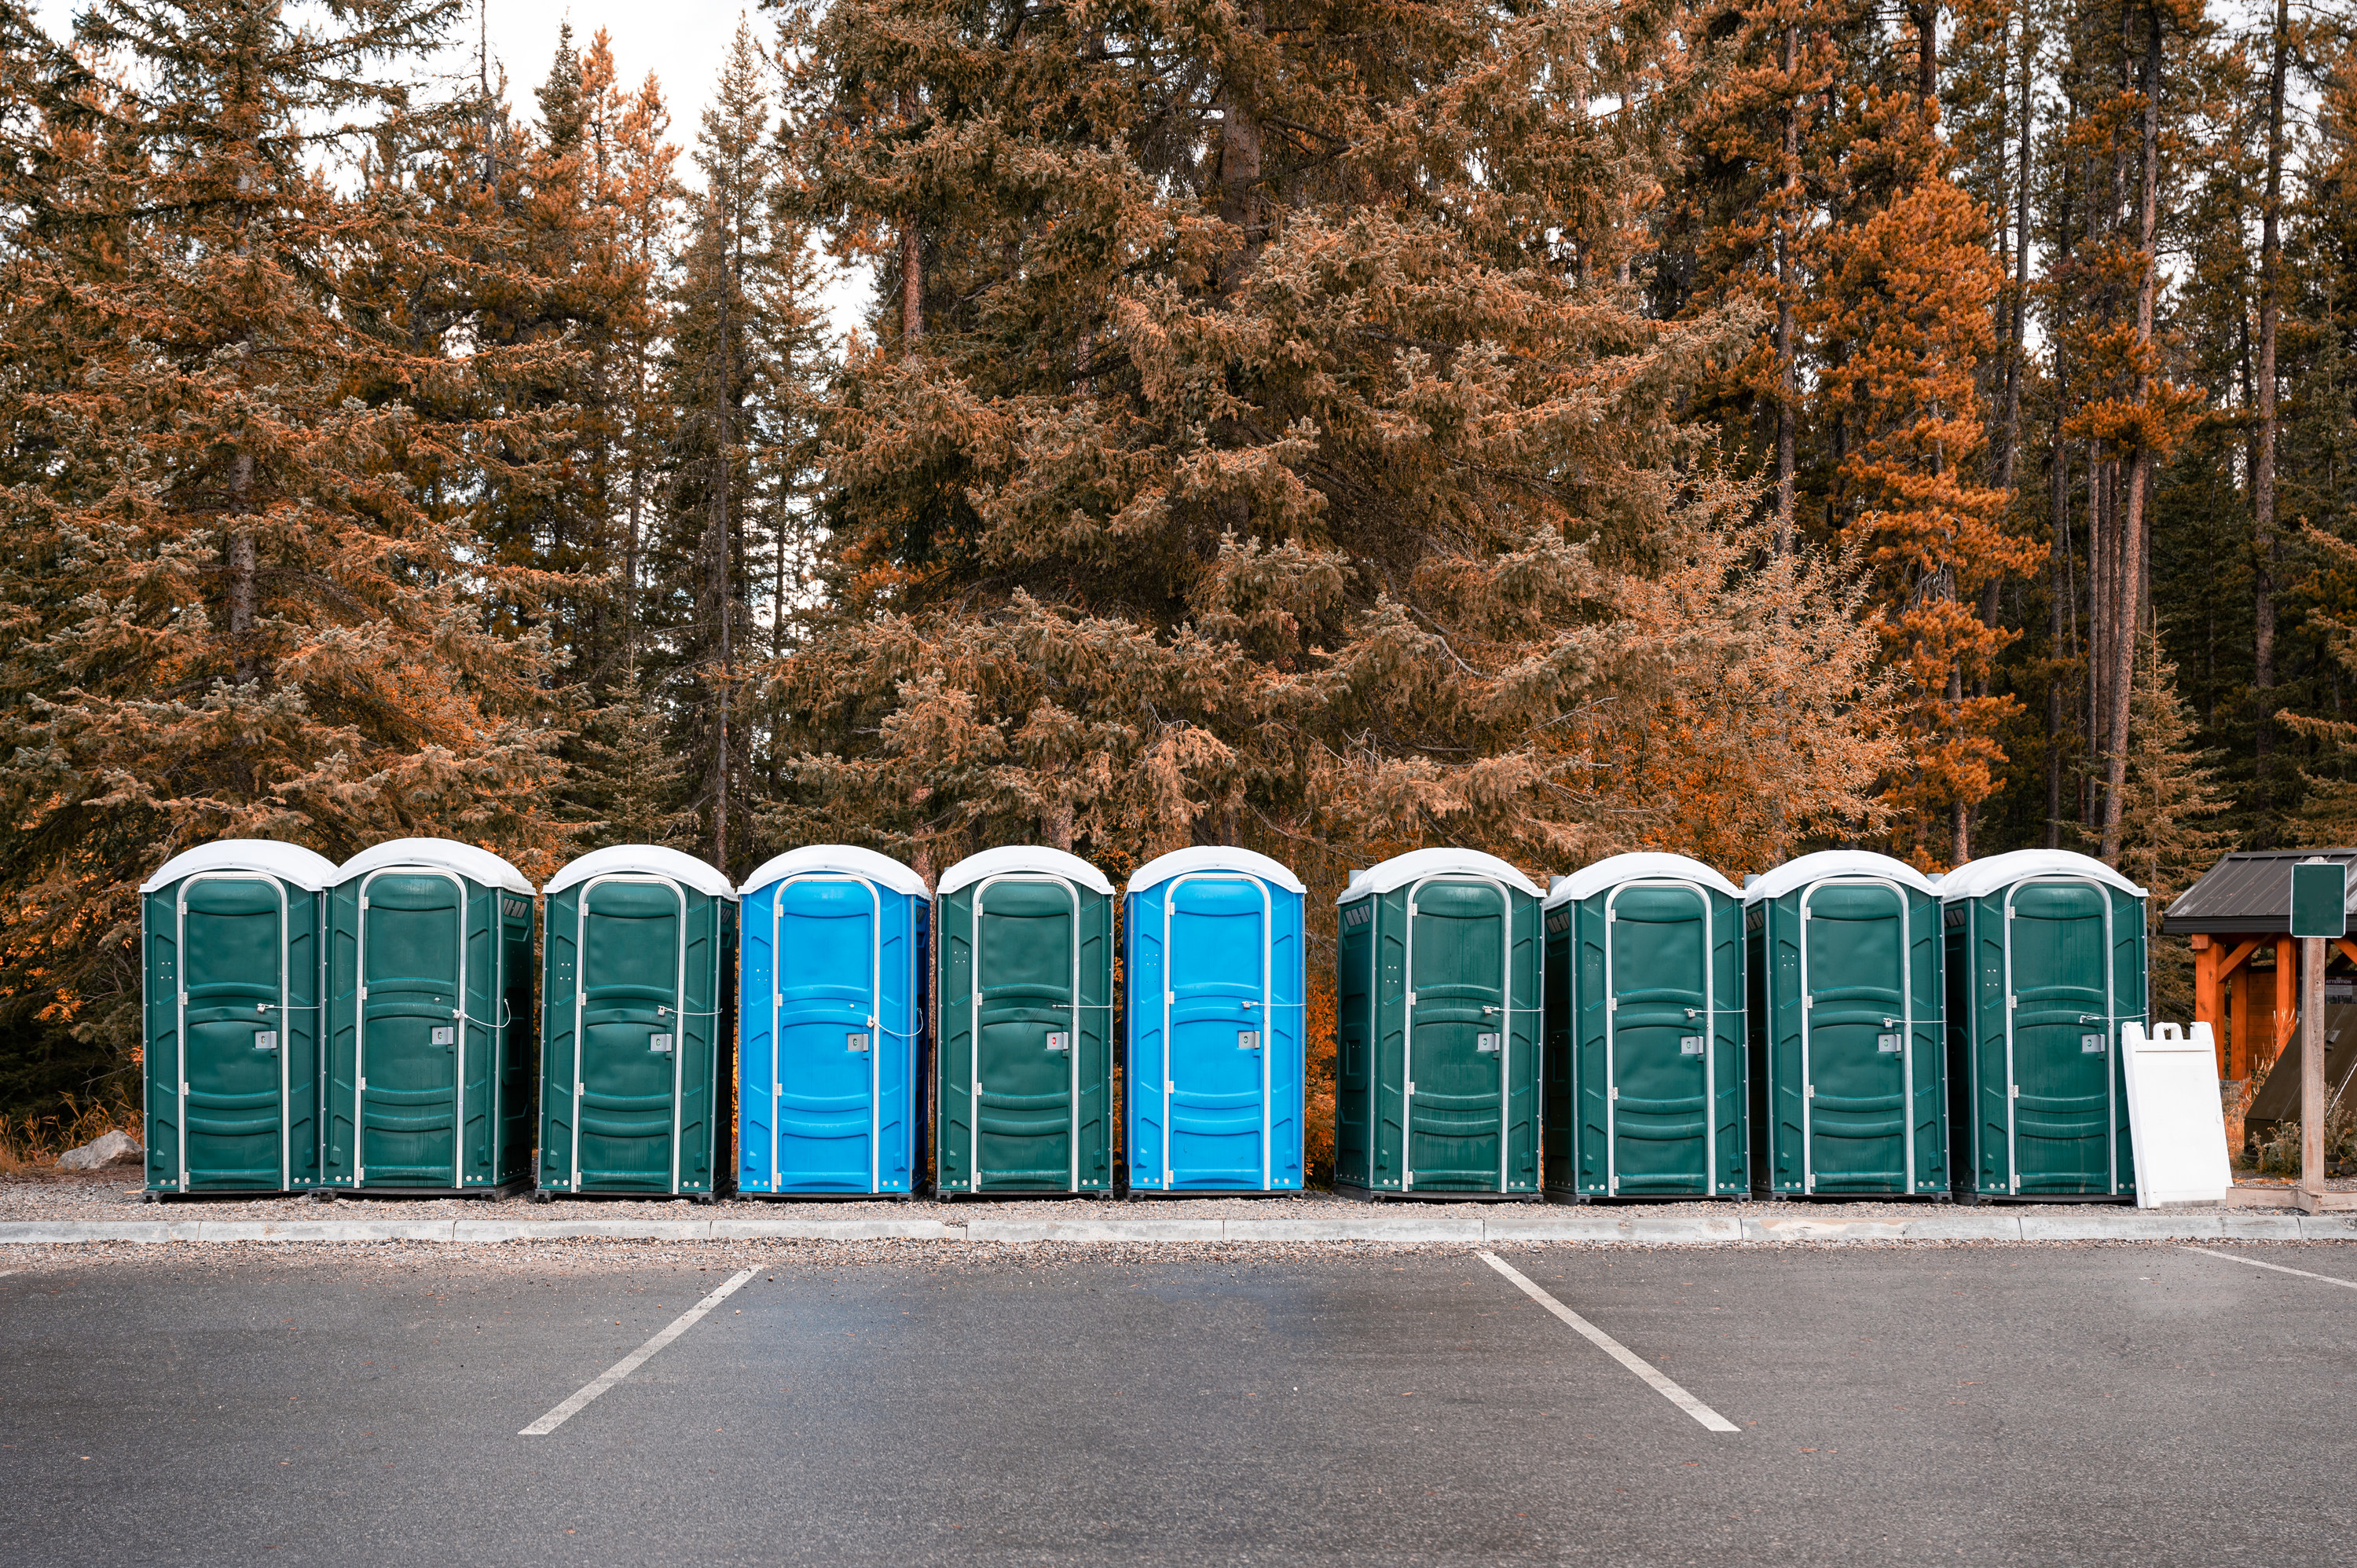 A row of portable toilets in a parking lot